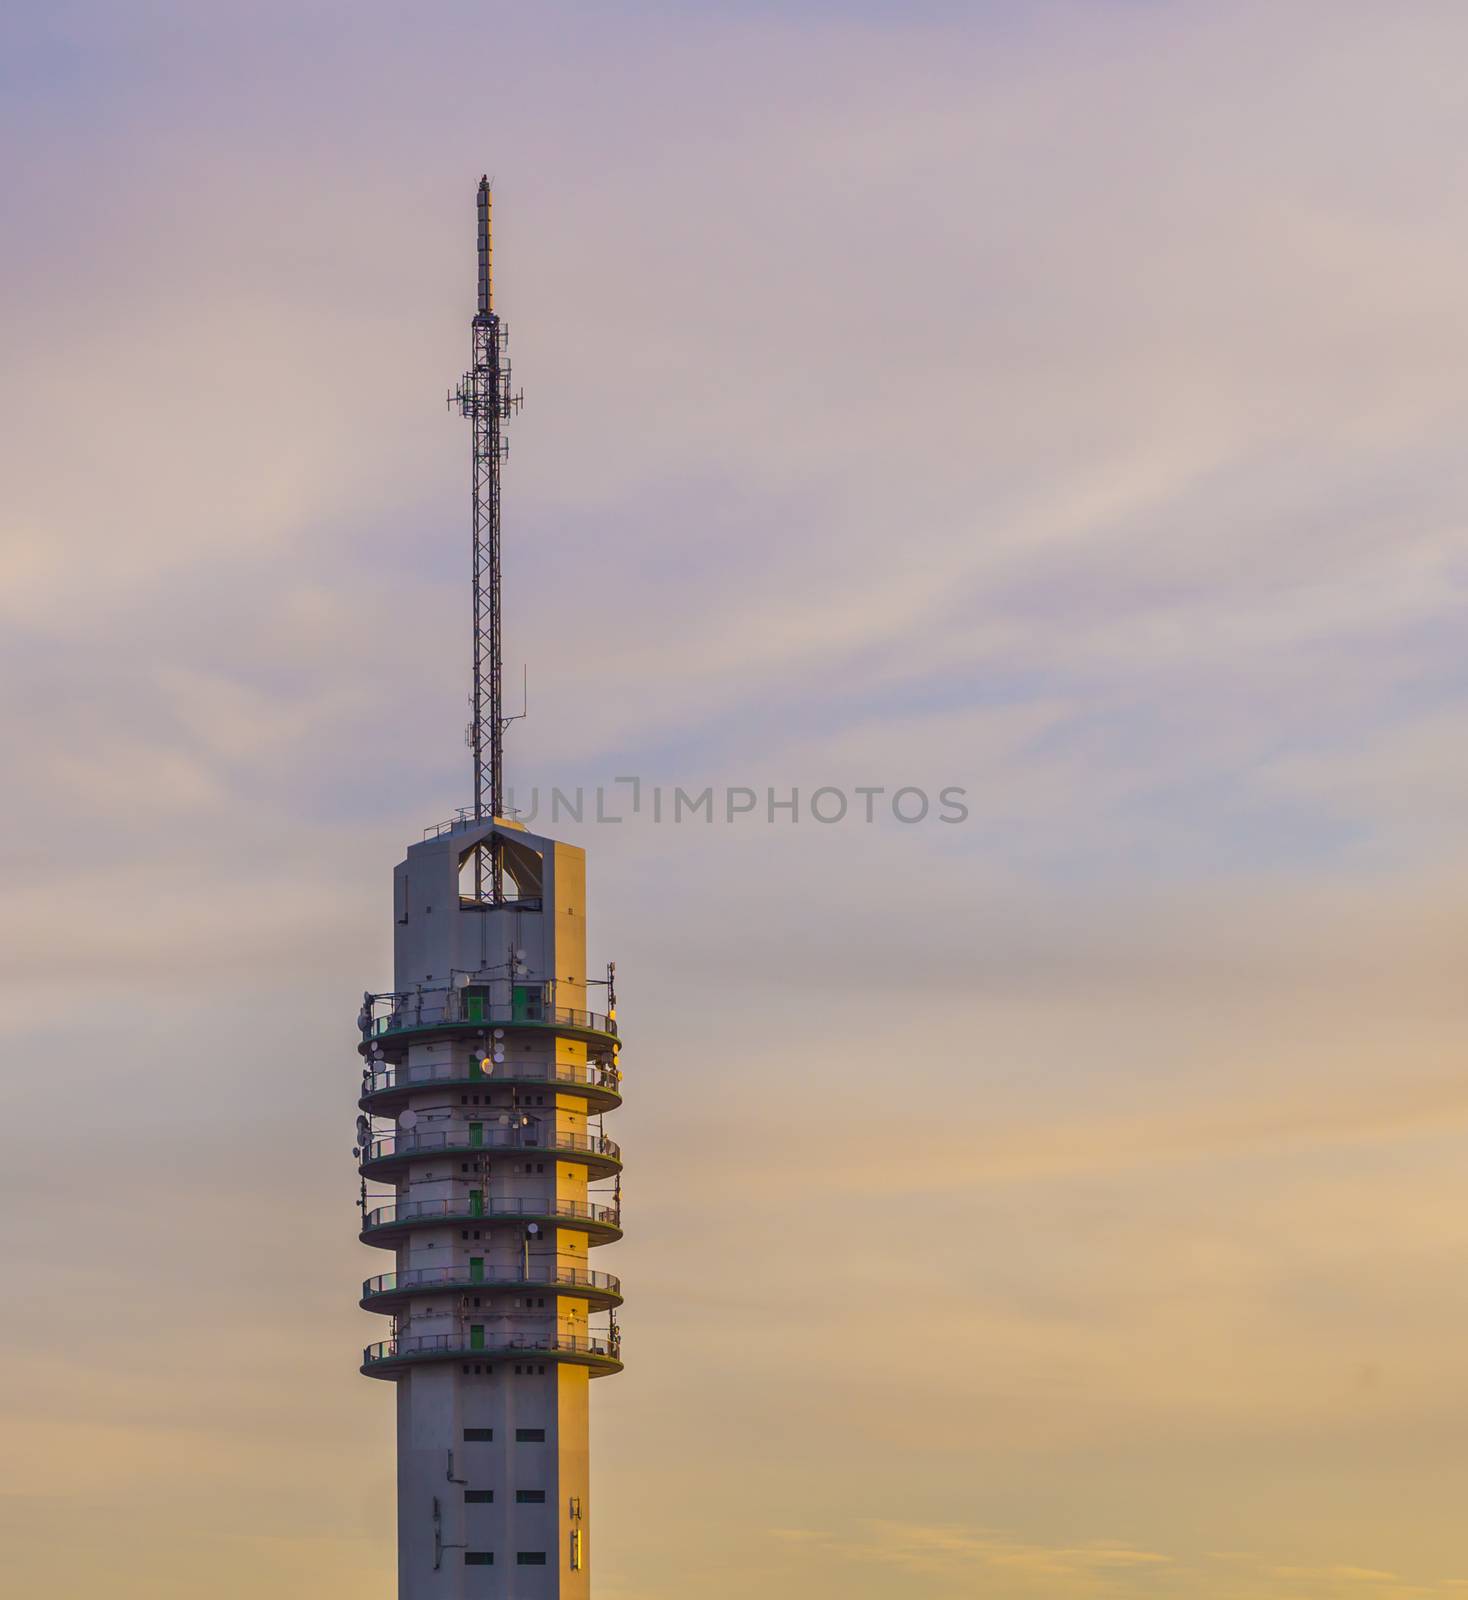 signal transmitting tower with a colorful sky full of clouds, telecommunication technology and architecture by charlottebleijenberg